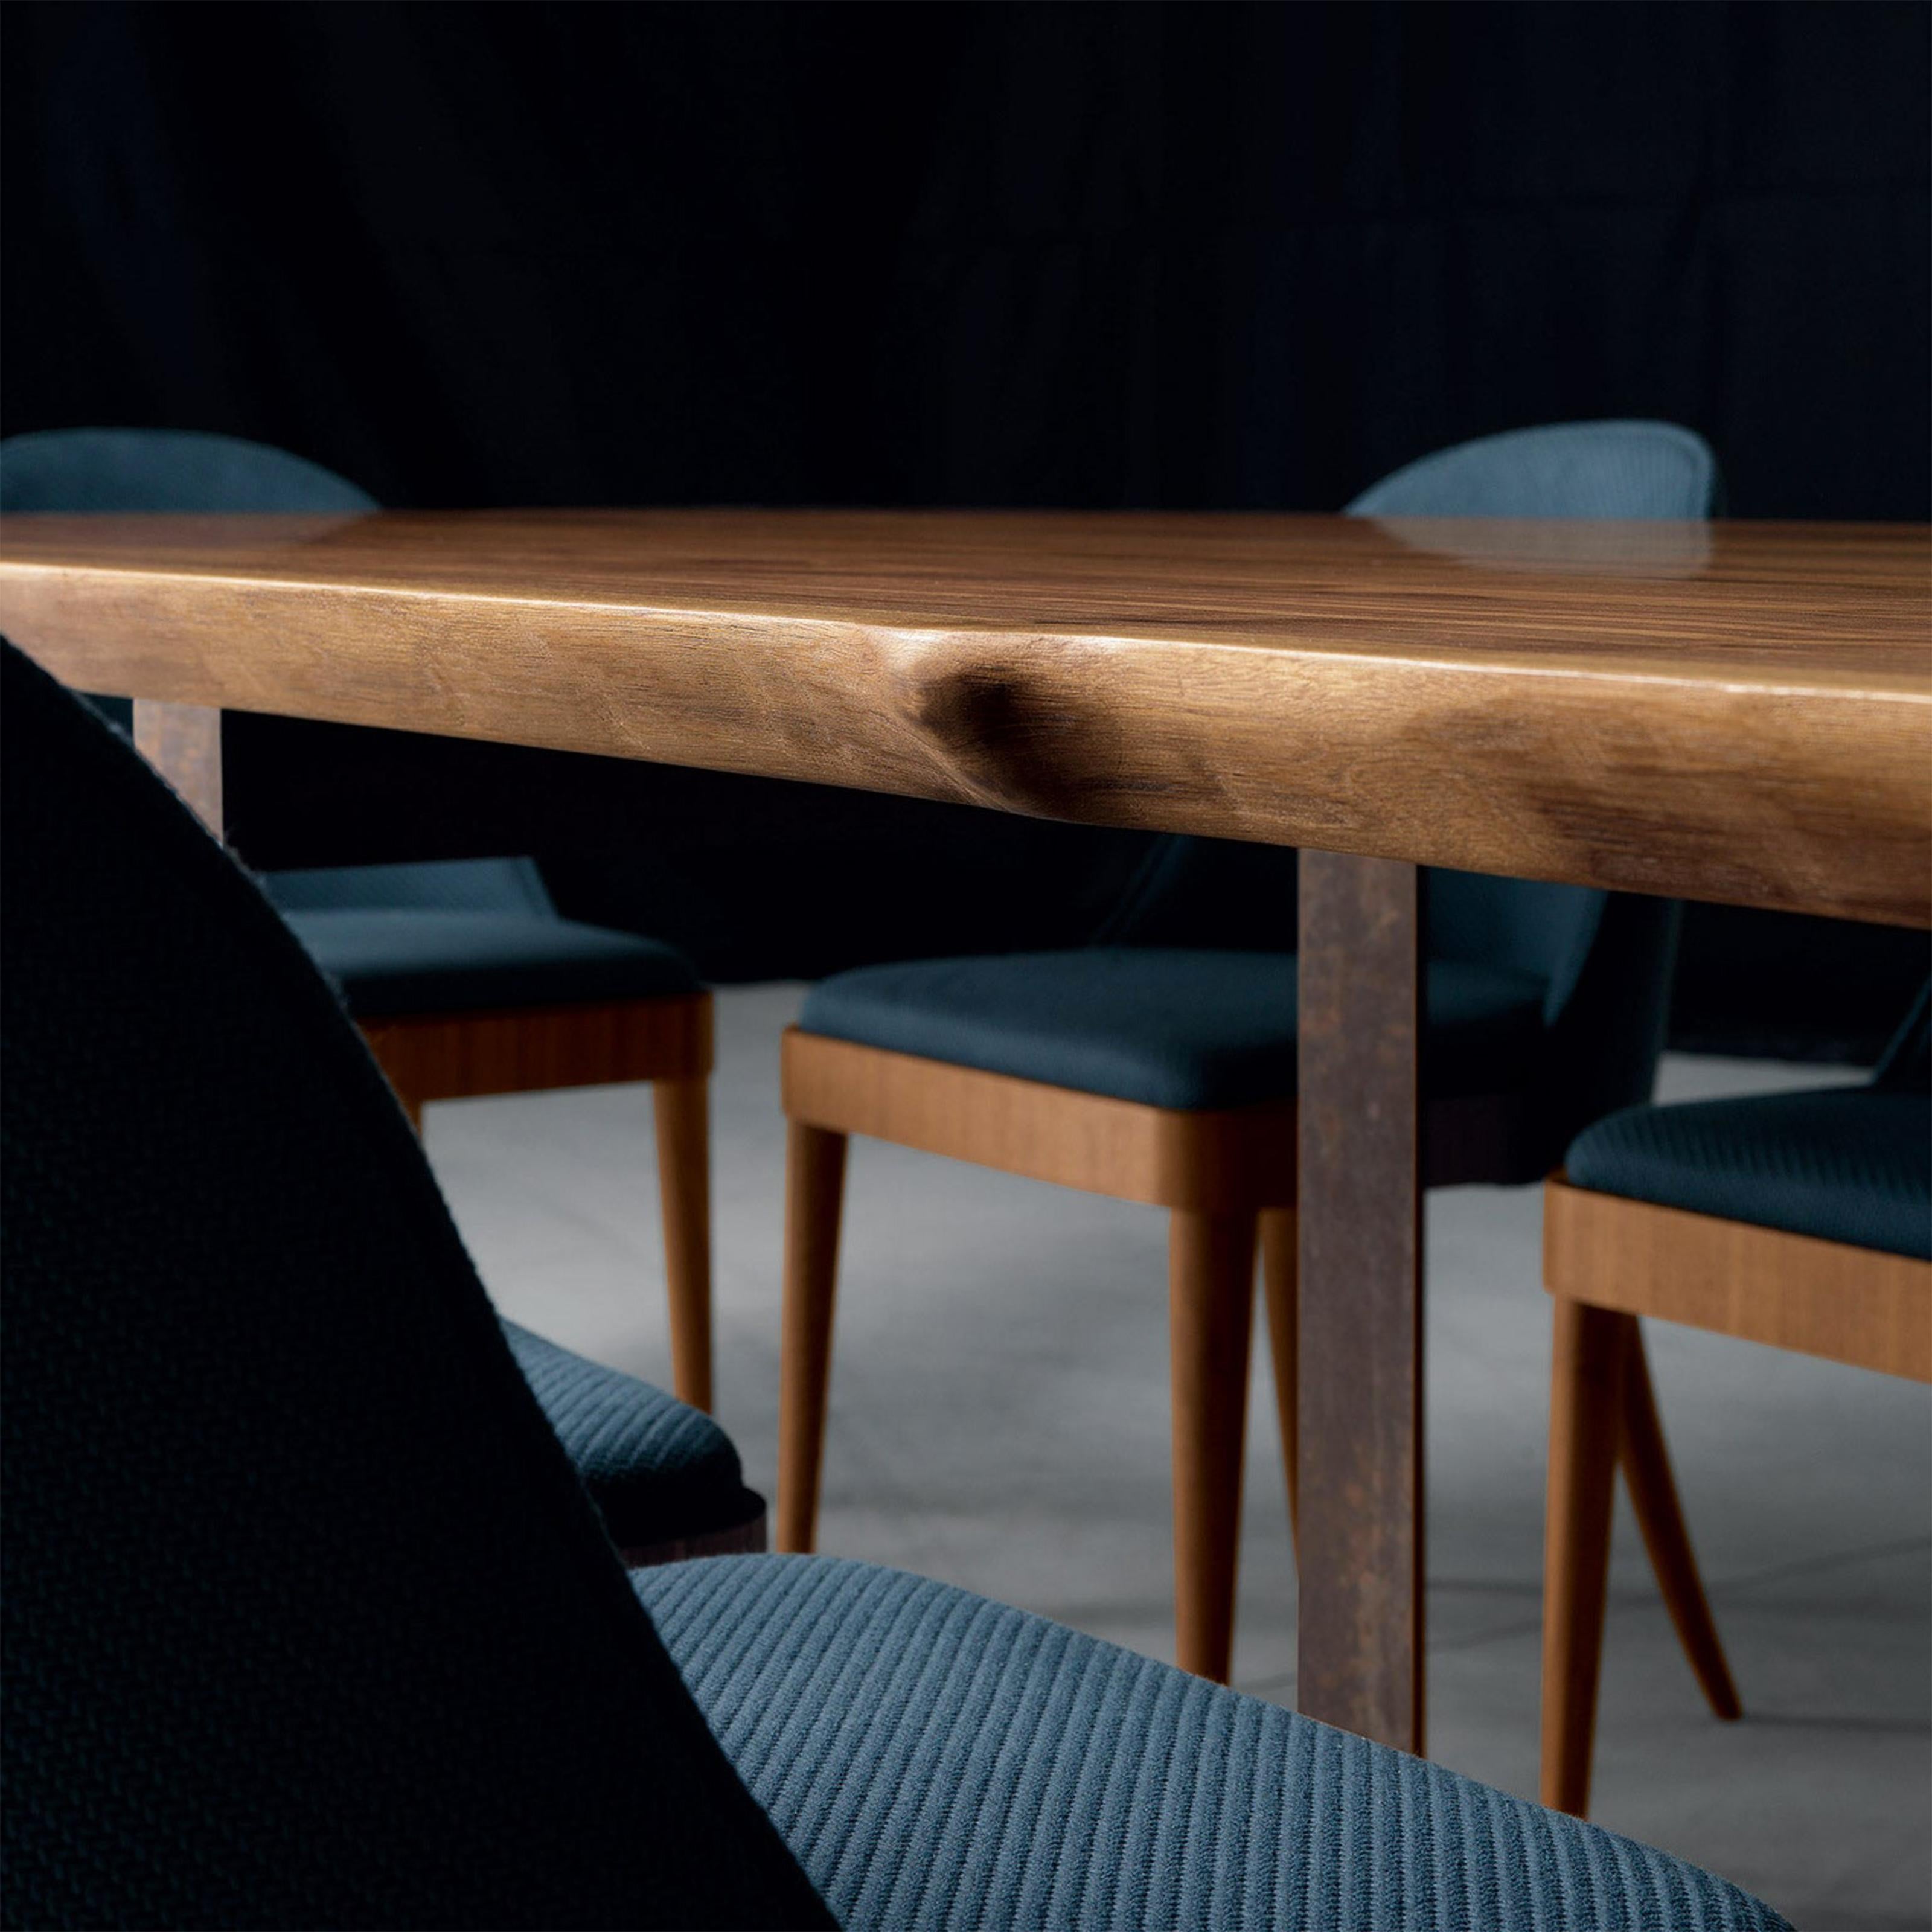 hand-assembled wooden tables